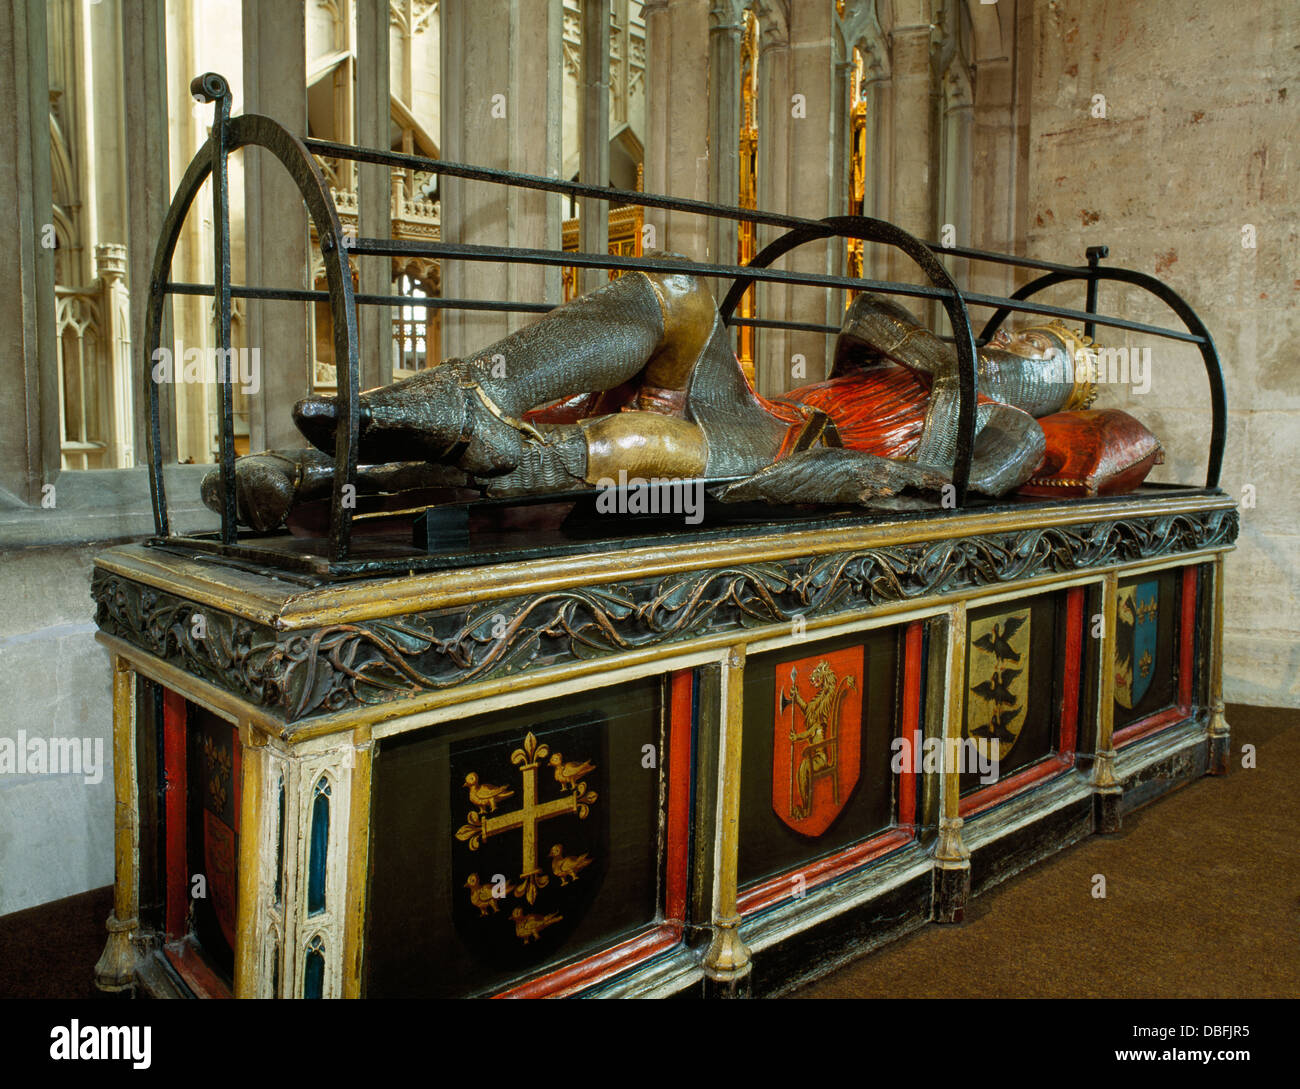 C13th painted wooden effigy of Robert Curthose, eldest son of William the Conquerer, in the presbytery of Gloucester Cathedral, England, former abbey. Stock Photo